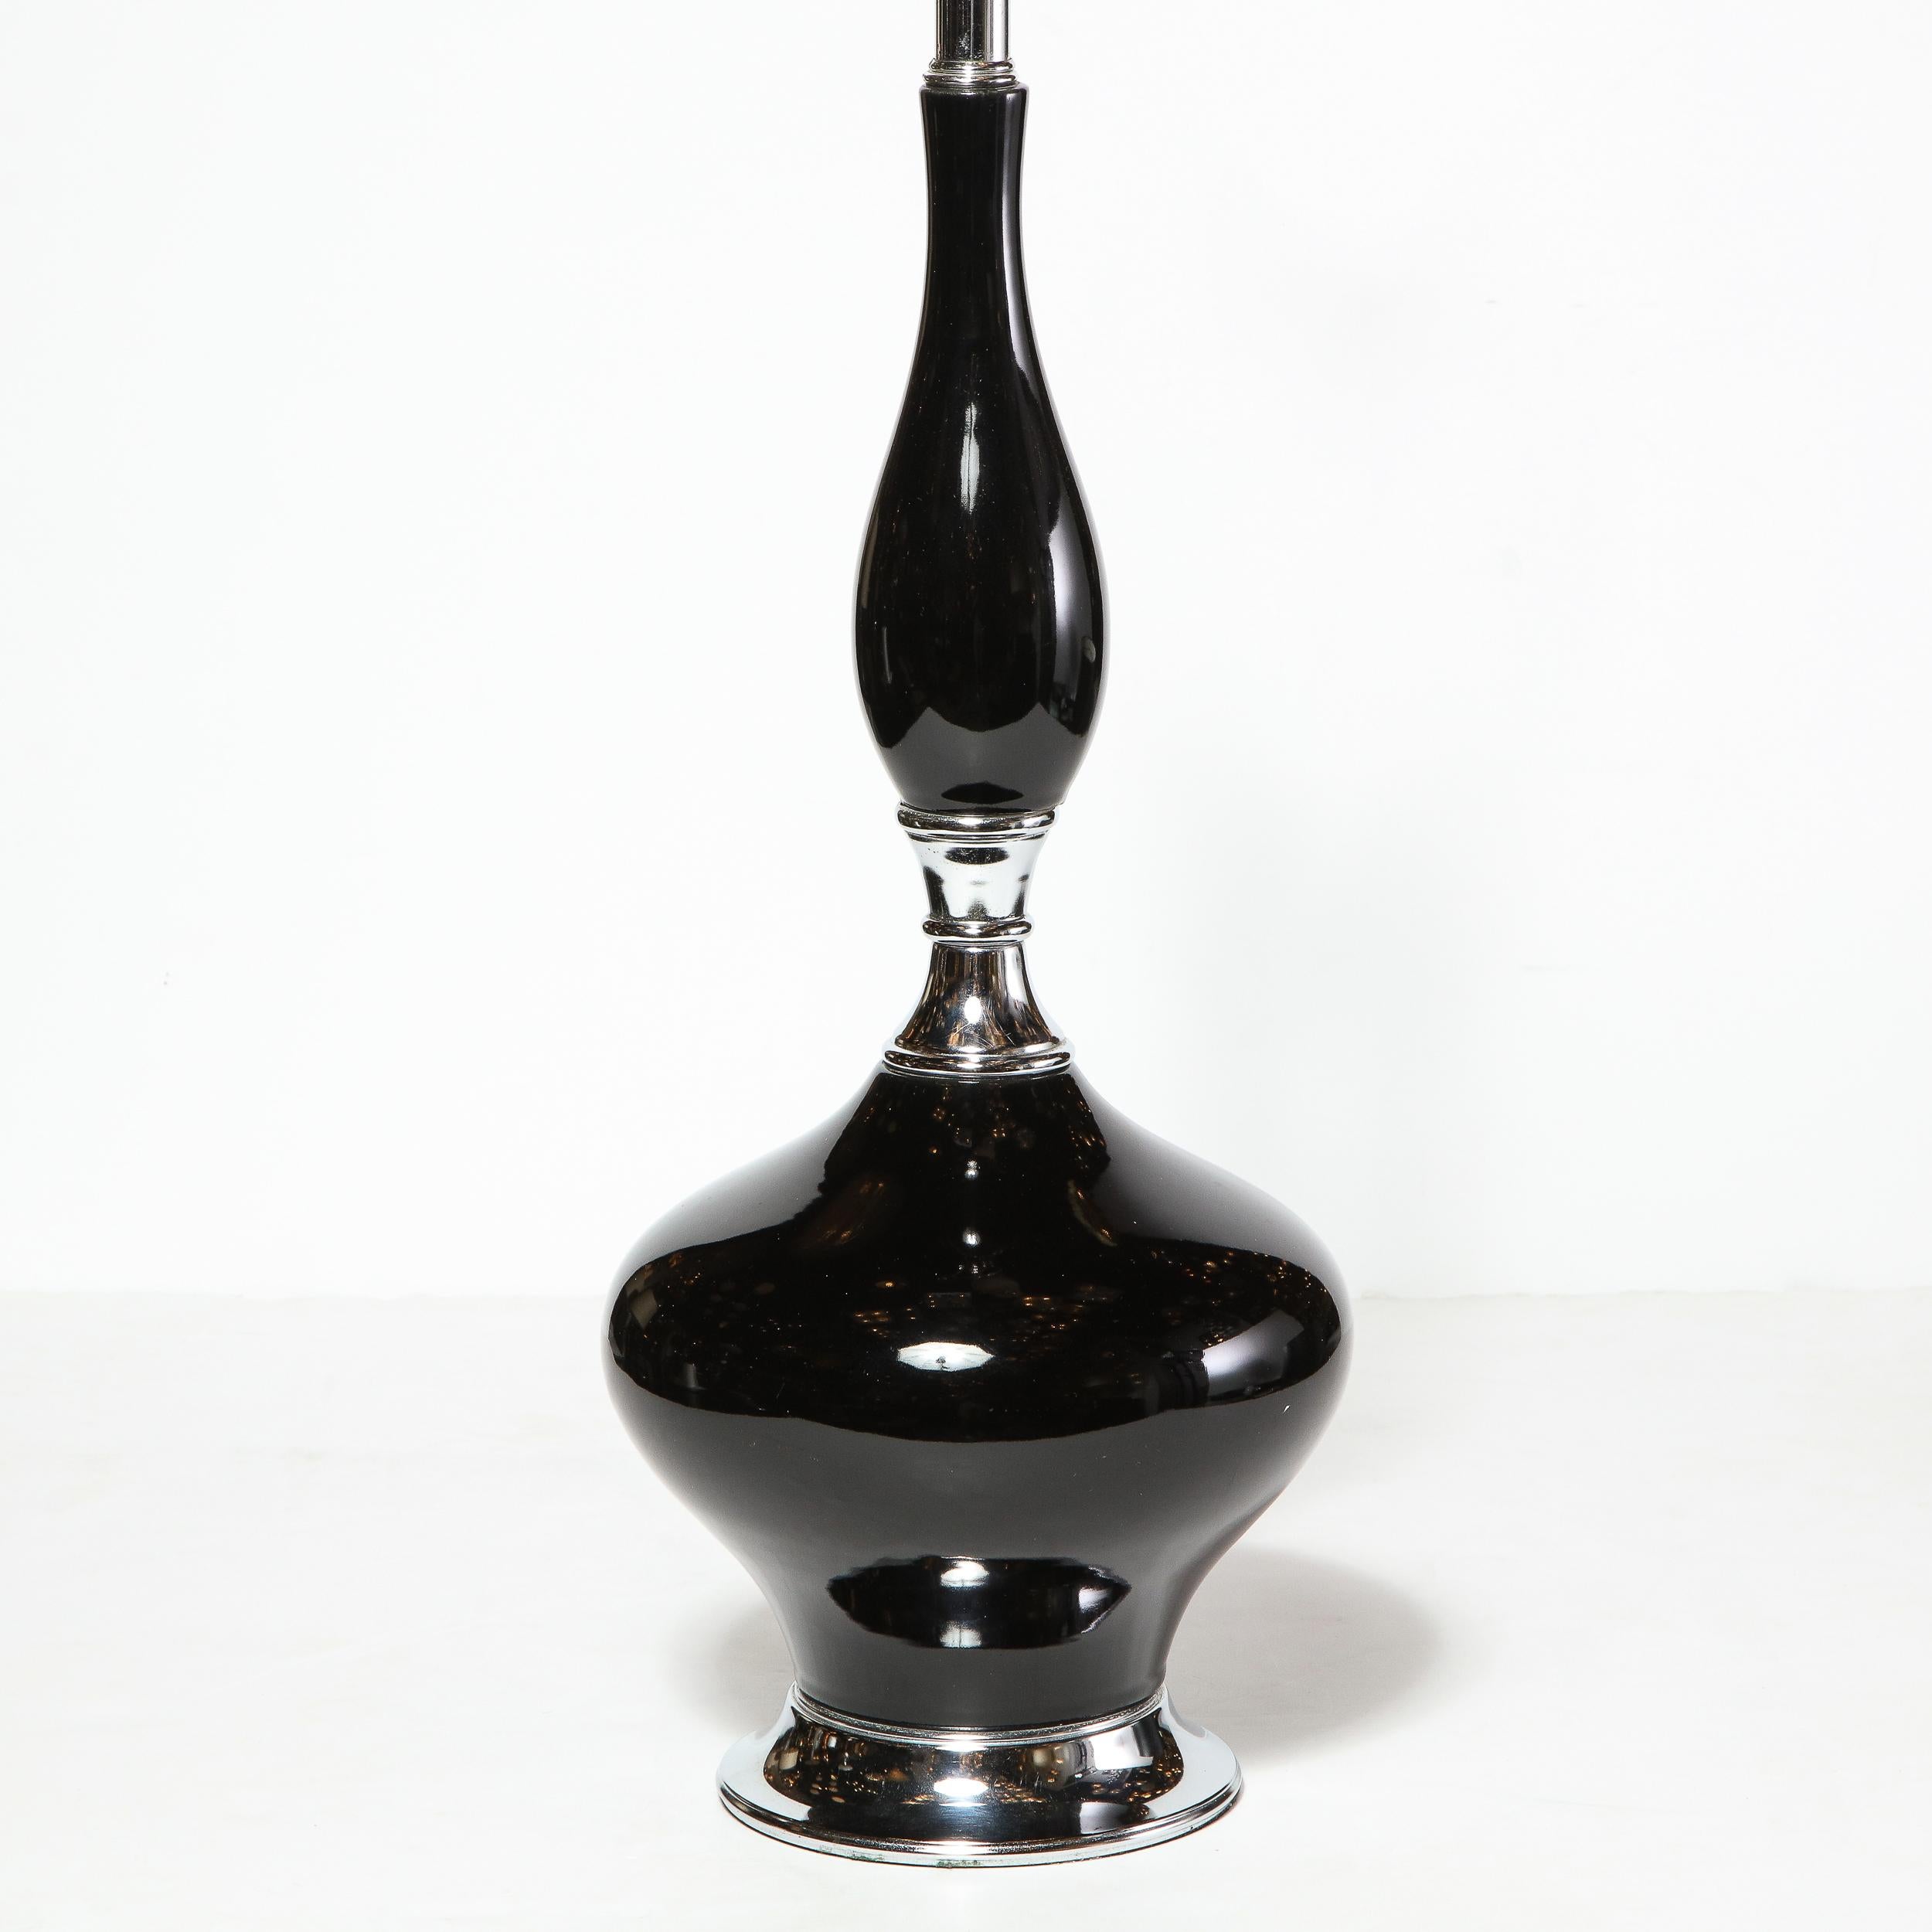 Pair of Mid-Century Modern Sculptural Black Glazed Ceramic Lamps w/ Chrome Bases For Sale 4